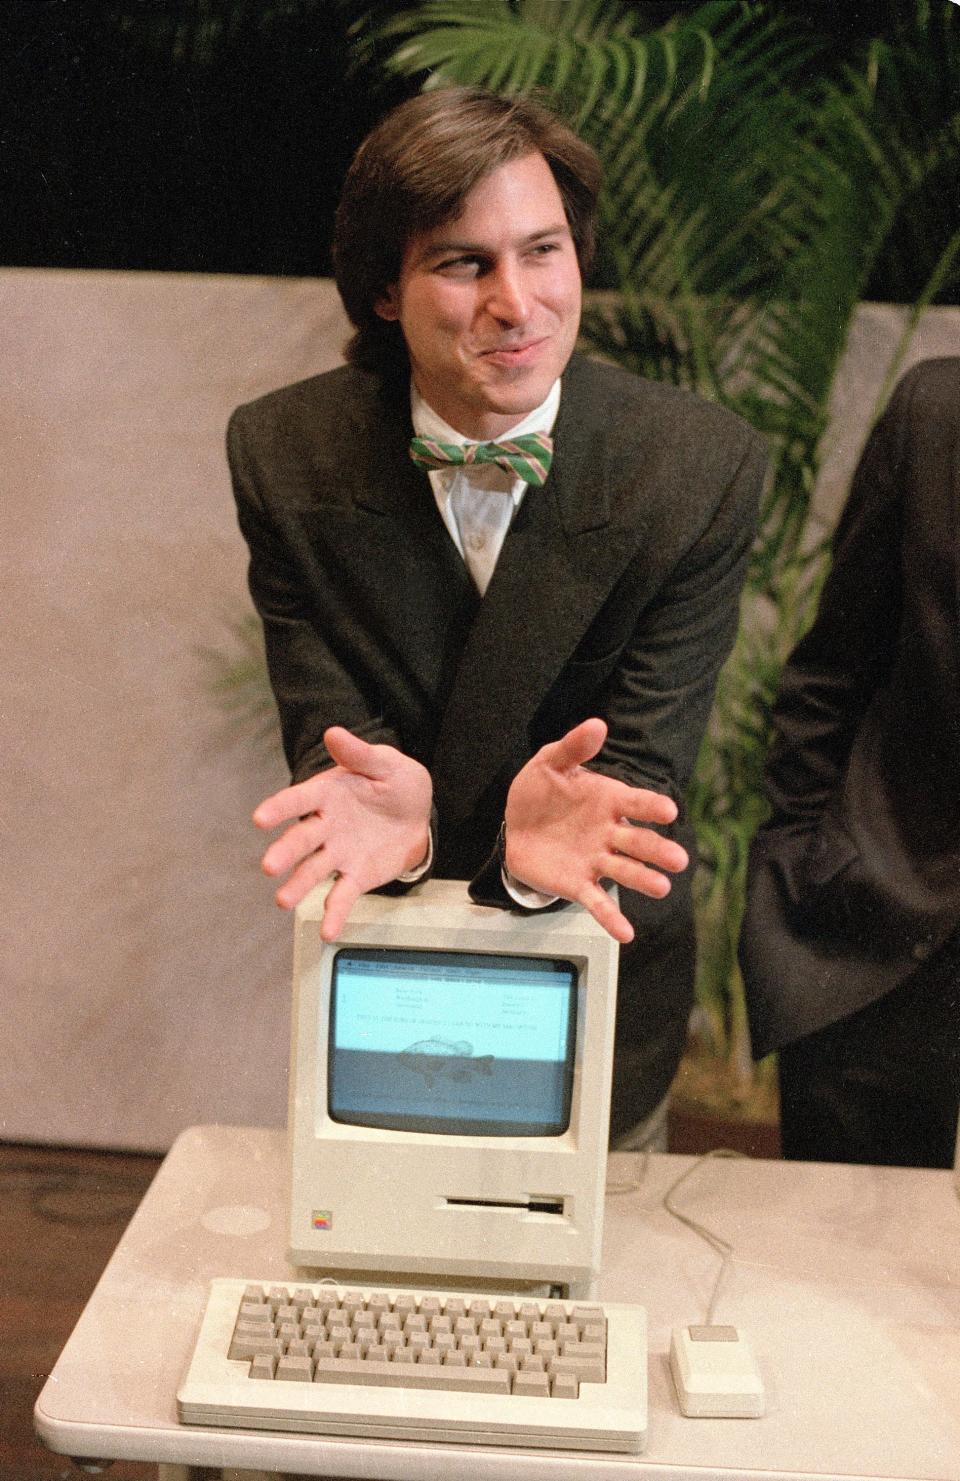 In this Jan. 24, 1984, file photo, Steve Jobs, chairman of the board of Apple Computer, leans on the new "Macintosh" personal computer following a shareholder's meeting in Cupertino, Calif.